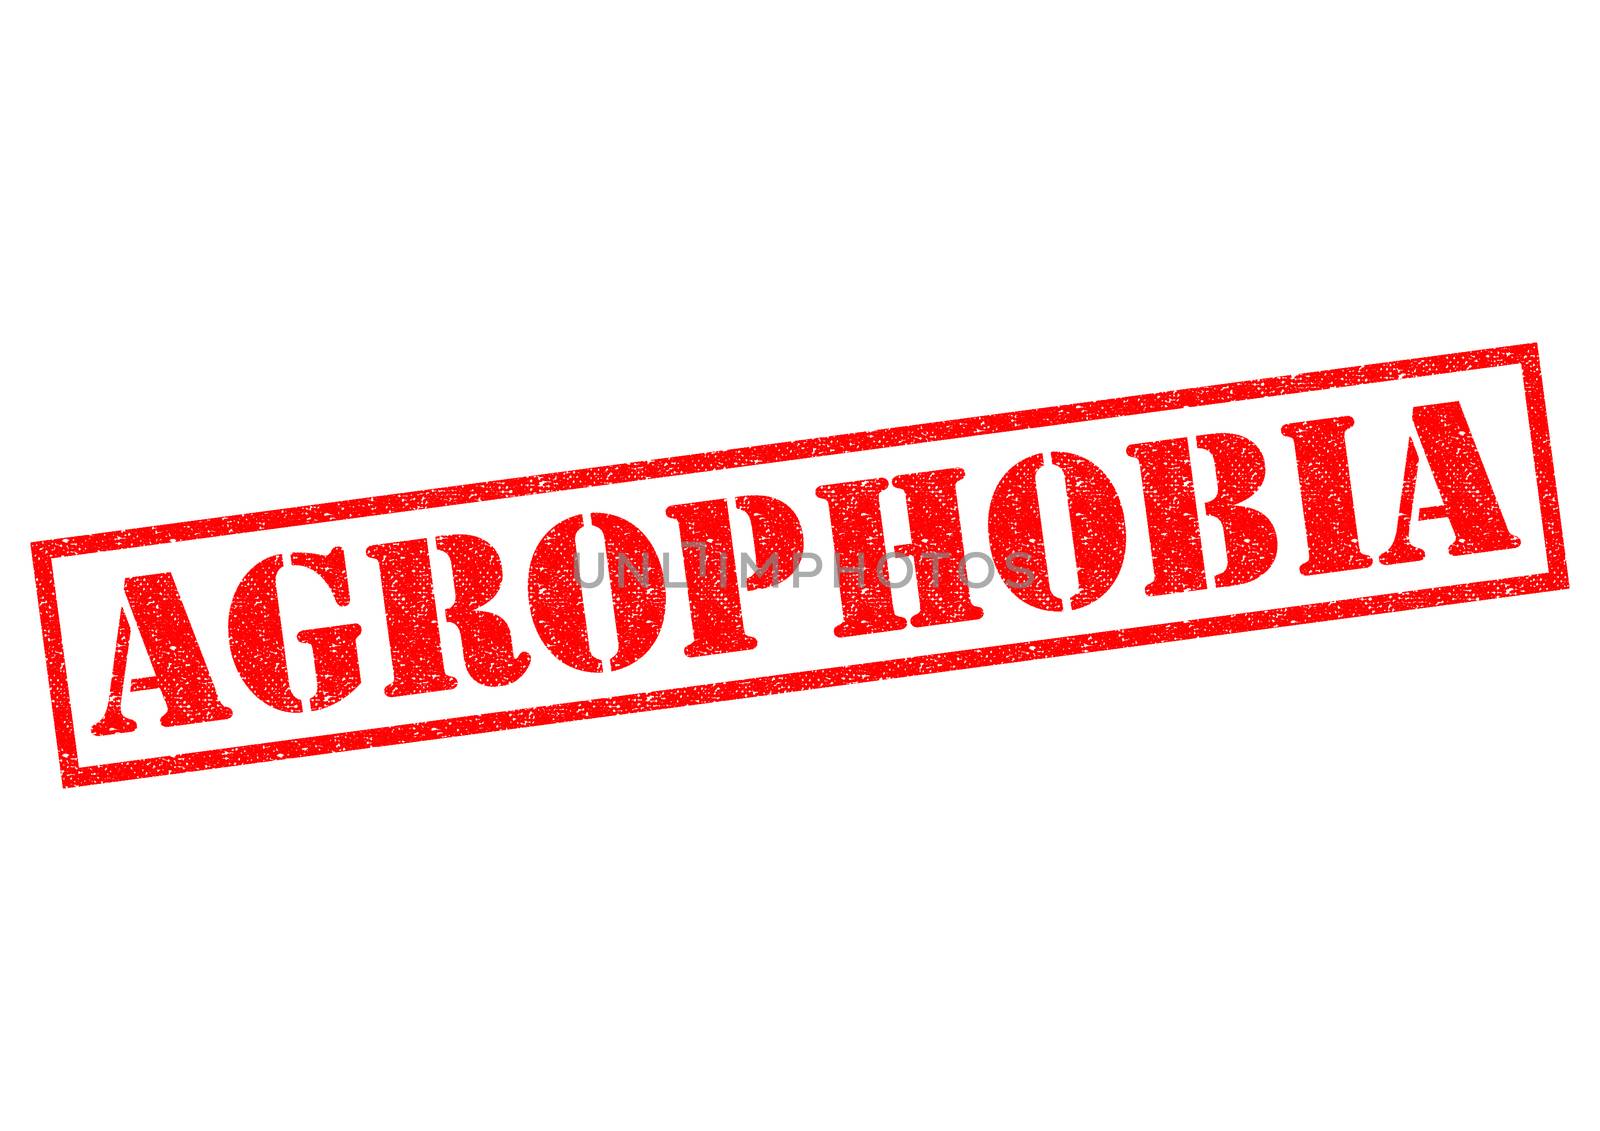 AGROPHOBIA (fear of being out in public) red Rubber Stamp over a white background.